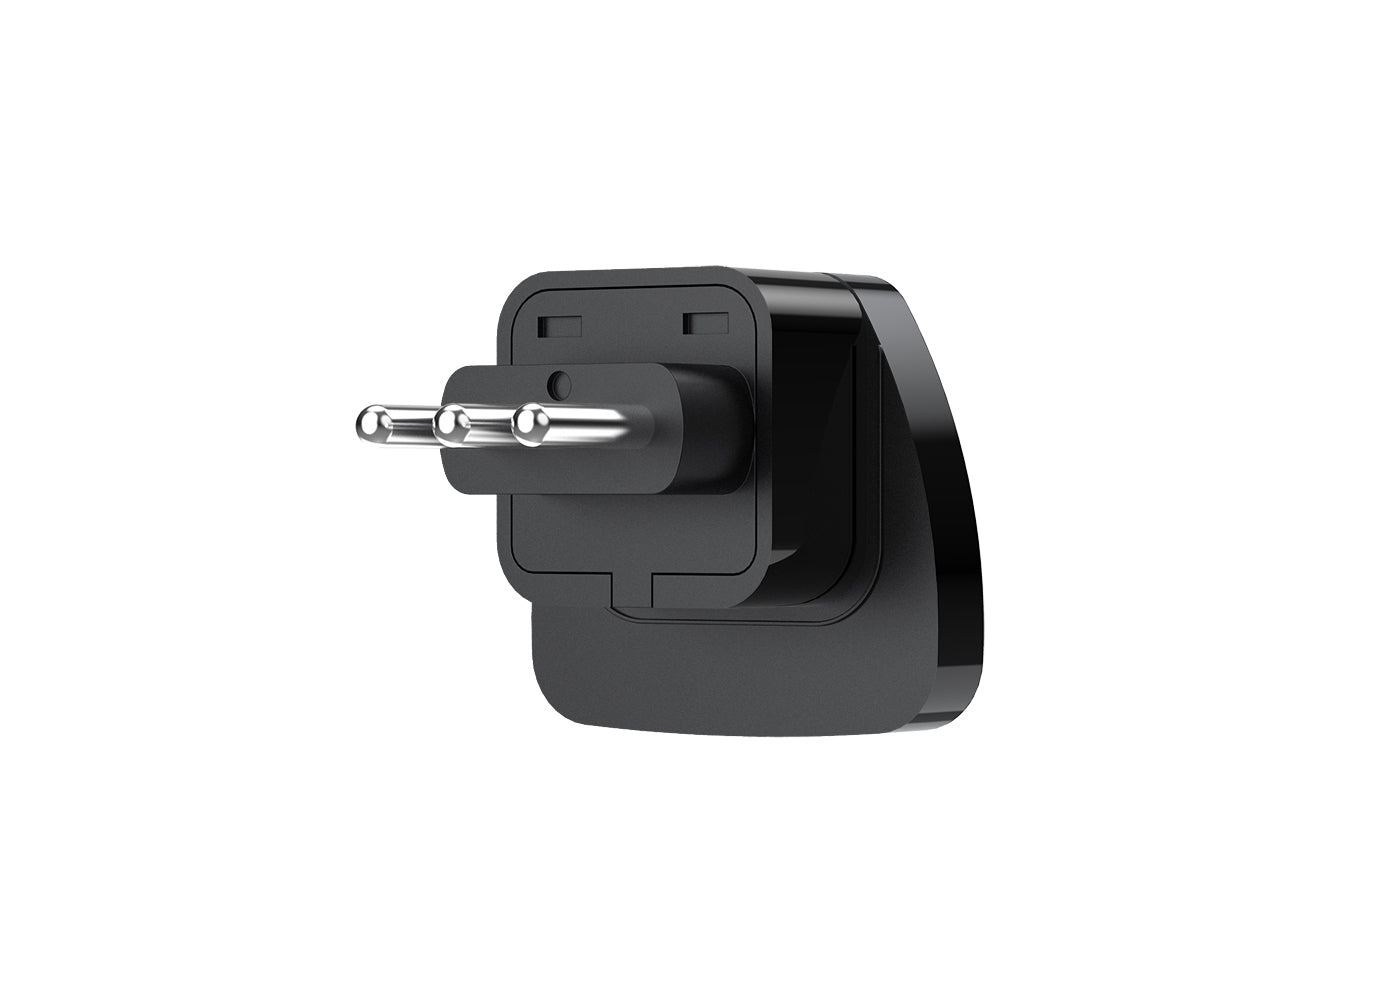 Universal Power Adapter for Italy